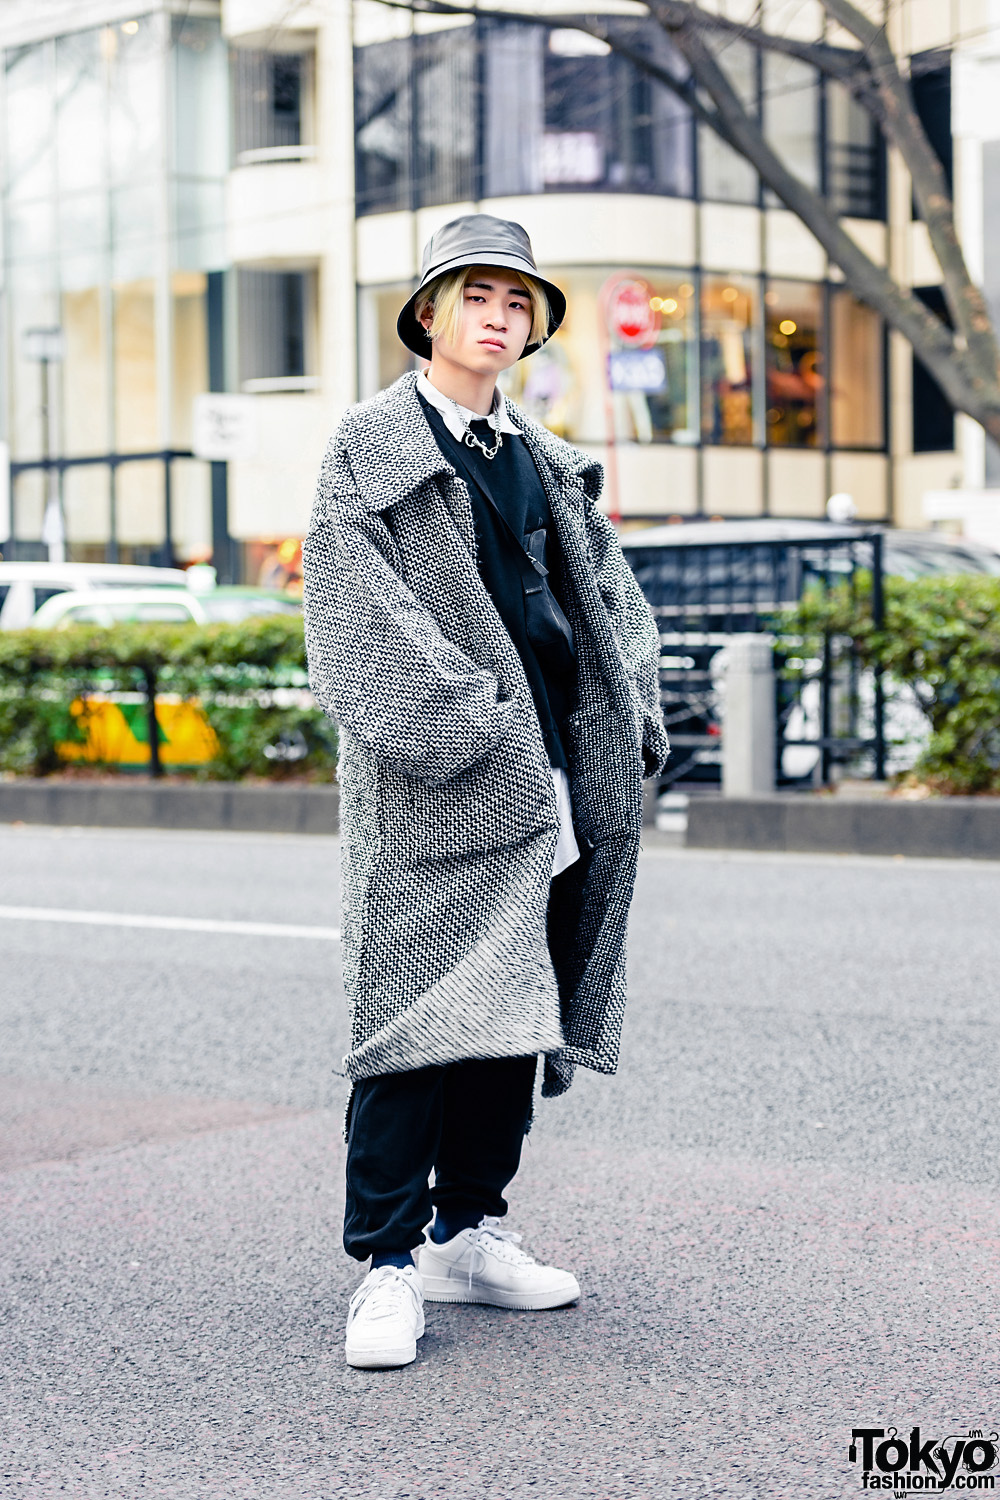 Harajuku Layered Winter Street Style w/ Bucket Hat, Ikumi Thick Coat, Layered Vintage Shirts, Moschino Pants, Nike Sneakers, Gucci Sling Bag & Vintage Silver Accessories